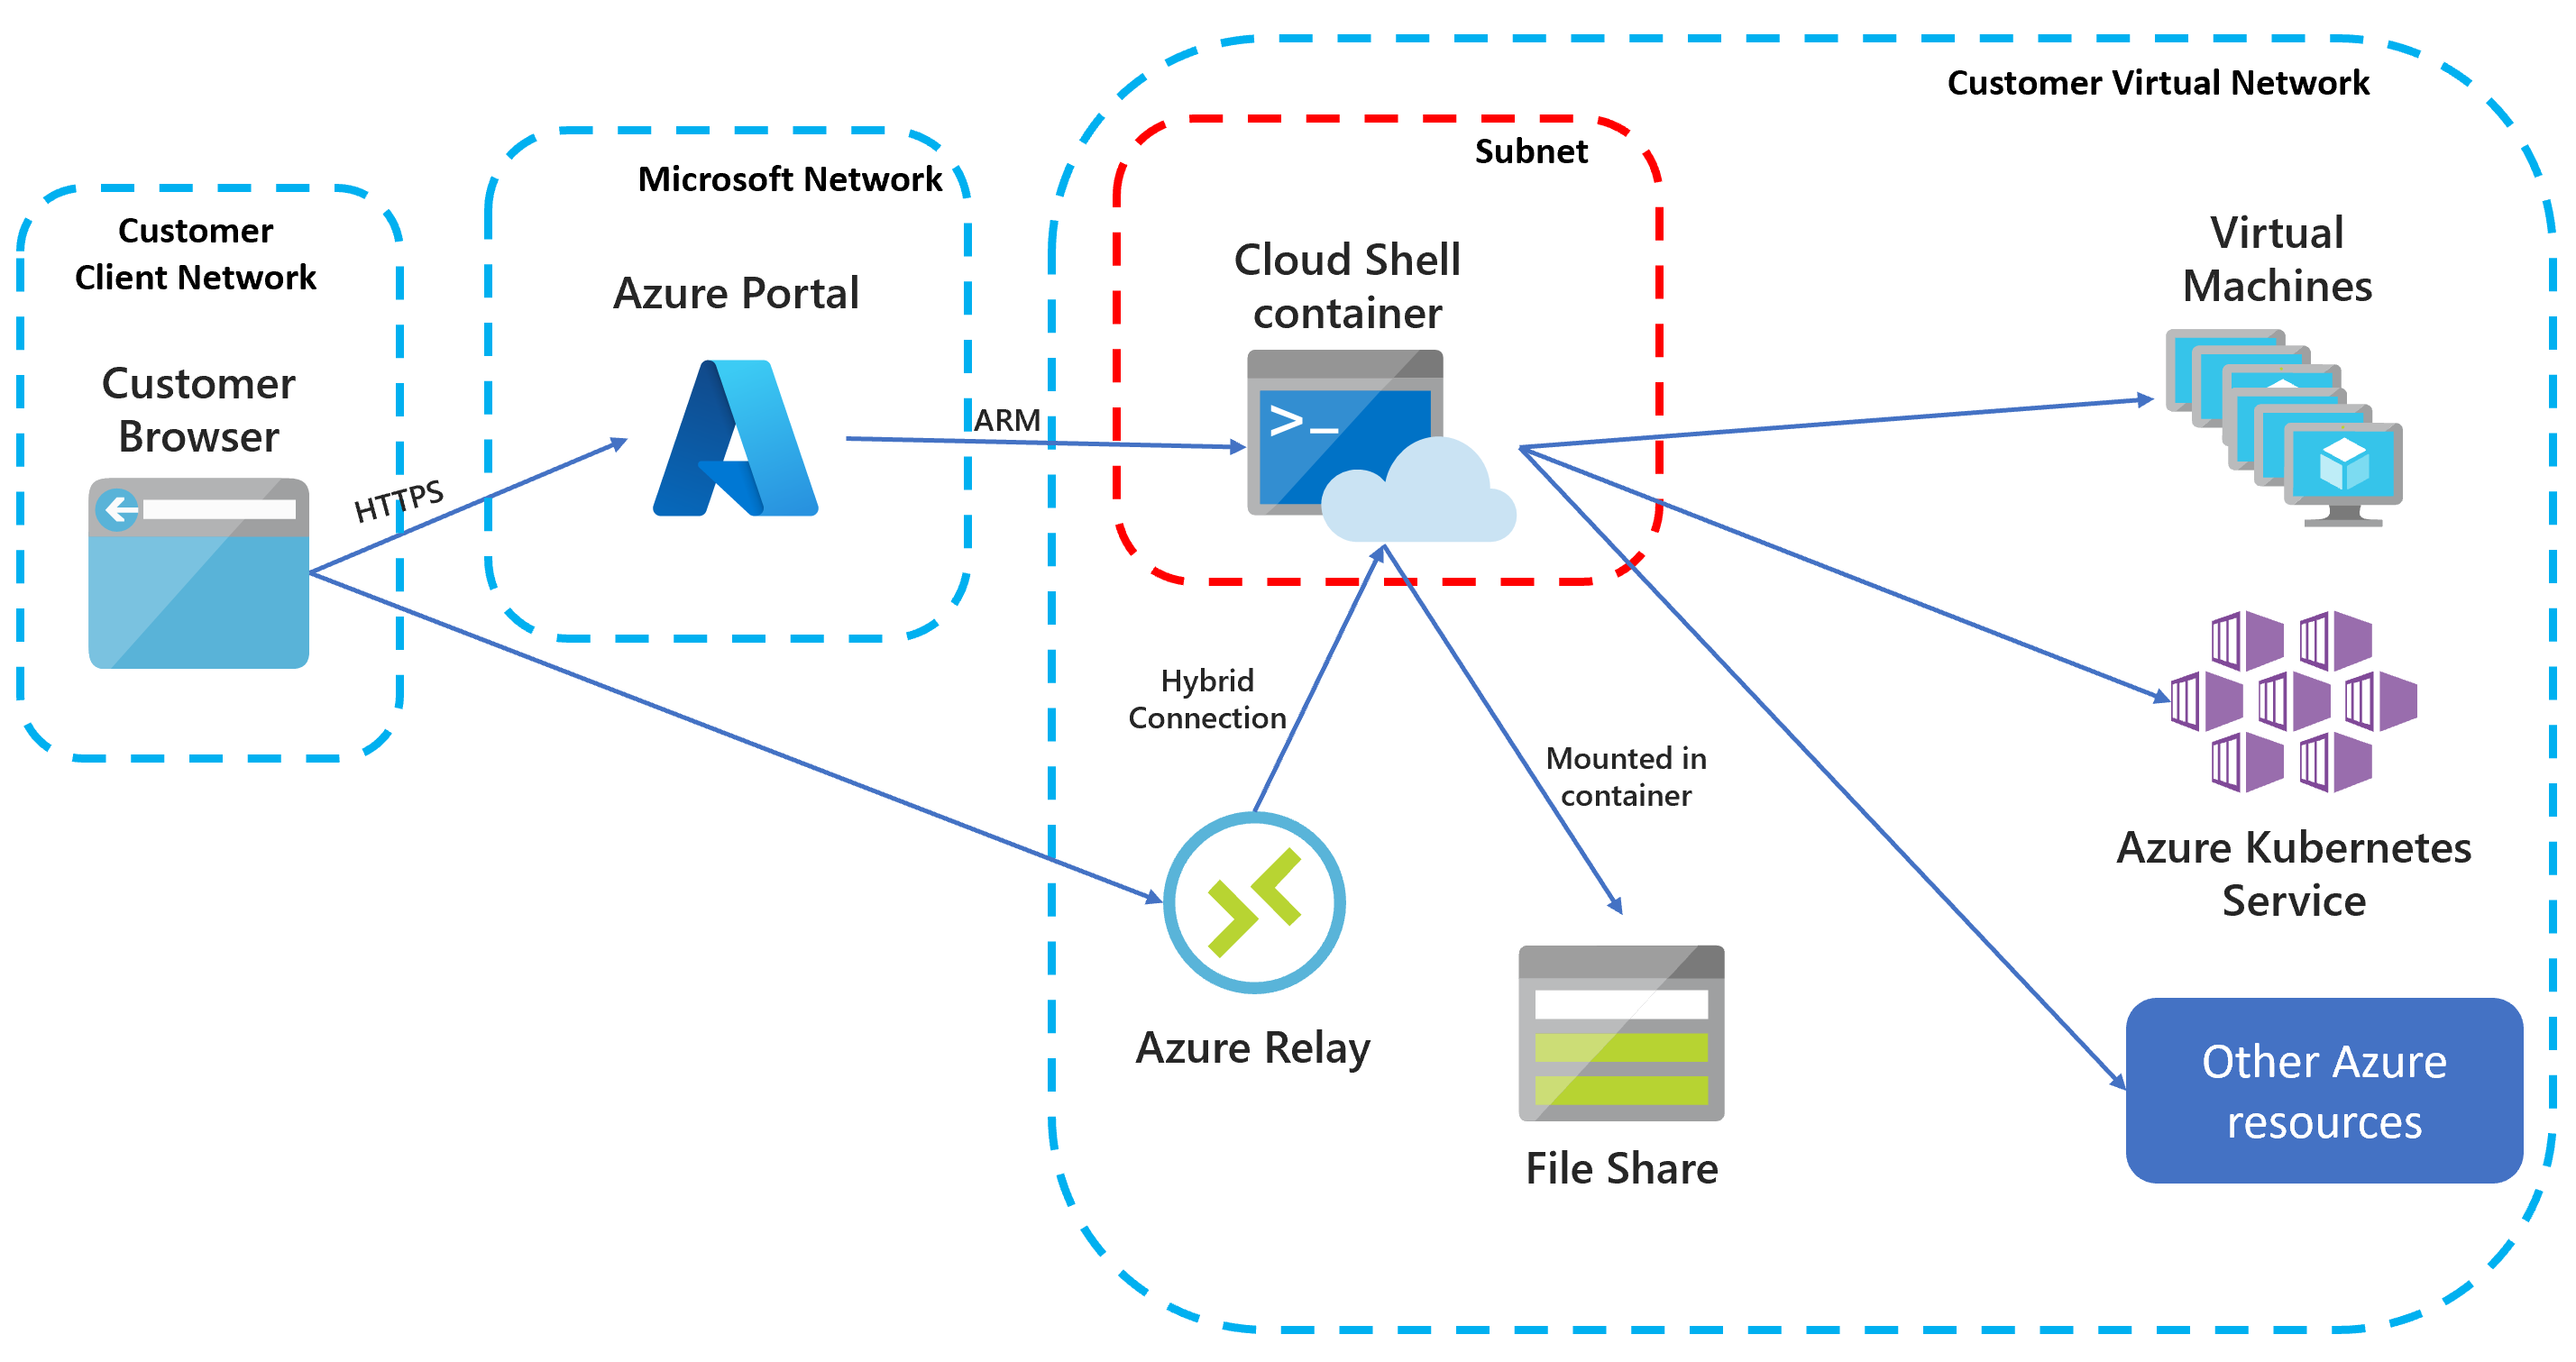 Illustration of a Cloud Shell isolated virtual network architecture.